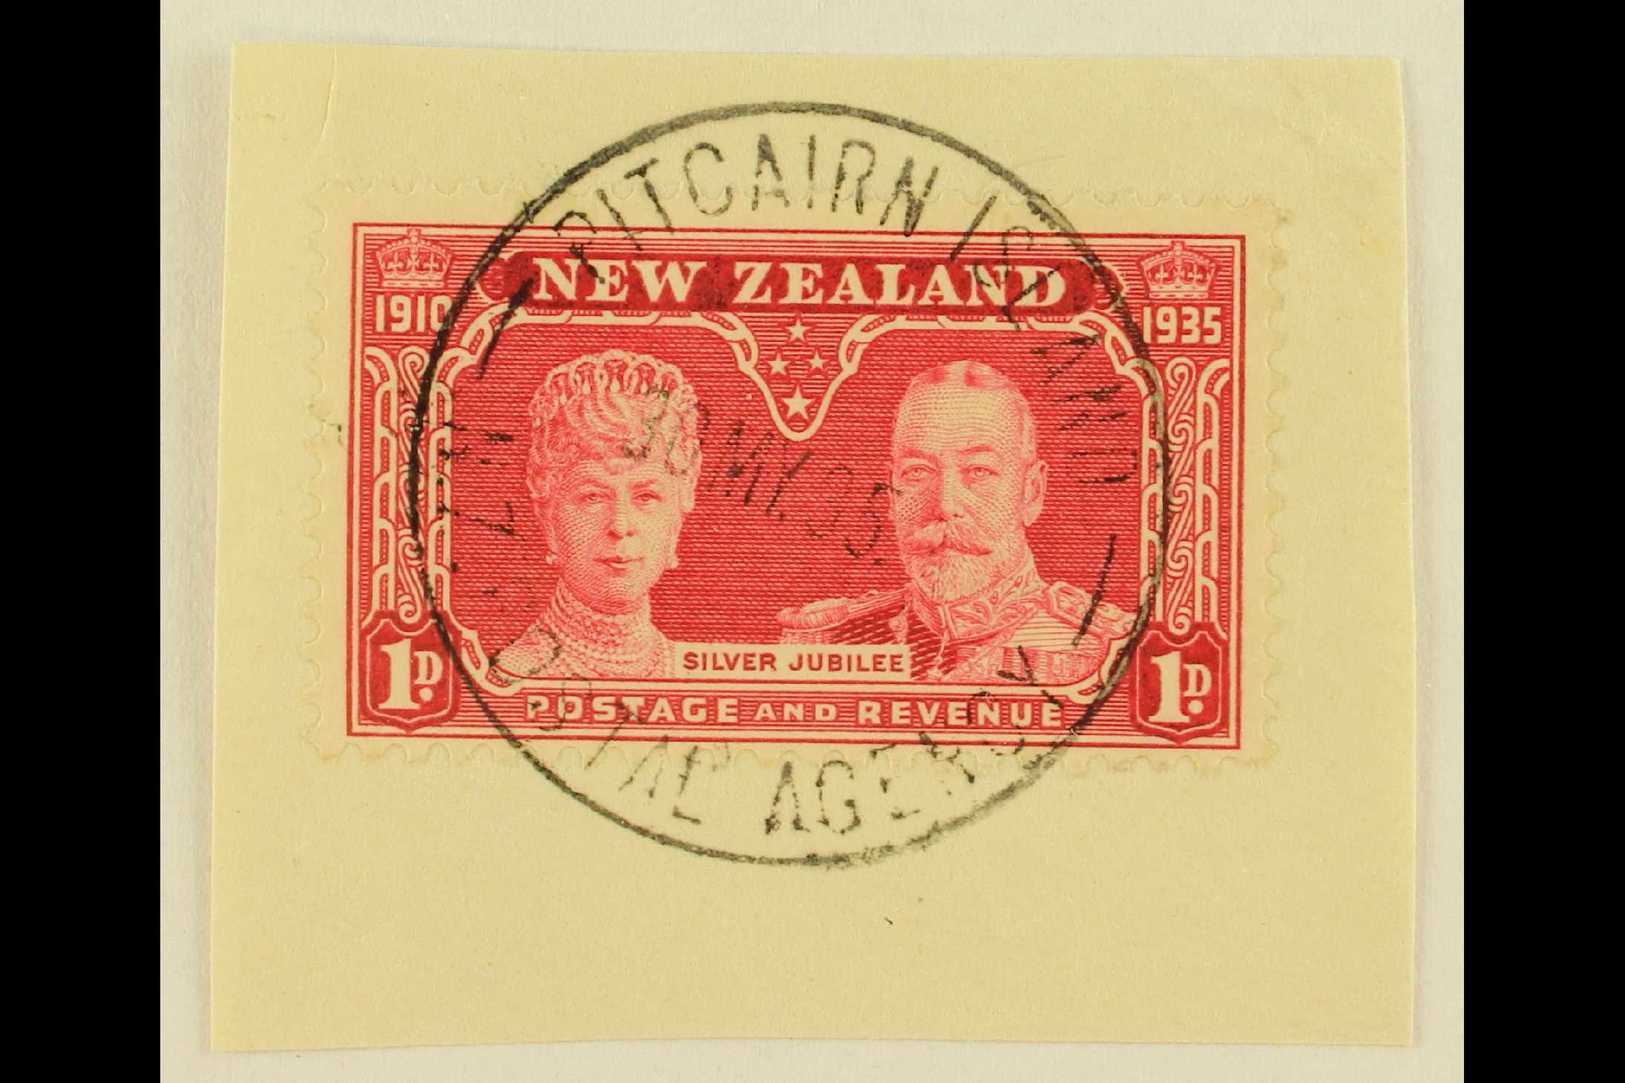 1935 1d Carmine Silver Jubilee Of New Zealand, On Piece Tied By Fine Full "PITCAIRN ISLANDS" Cds Cancel Of 30 MY 35, SG  - Pitcairn